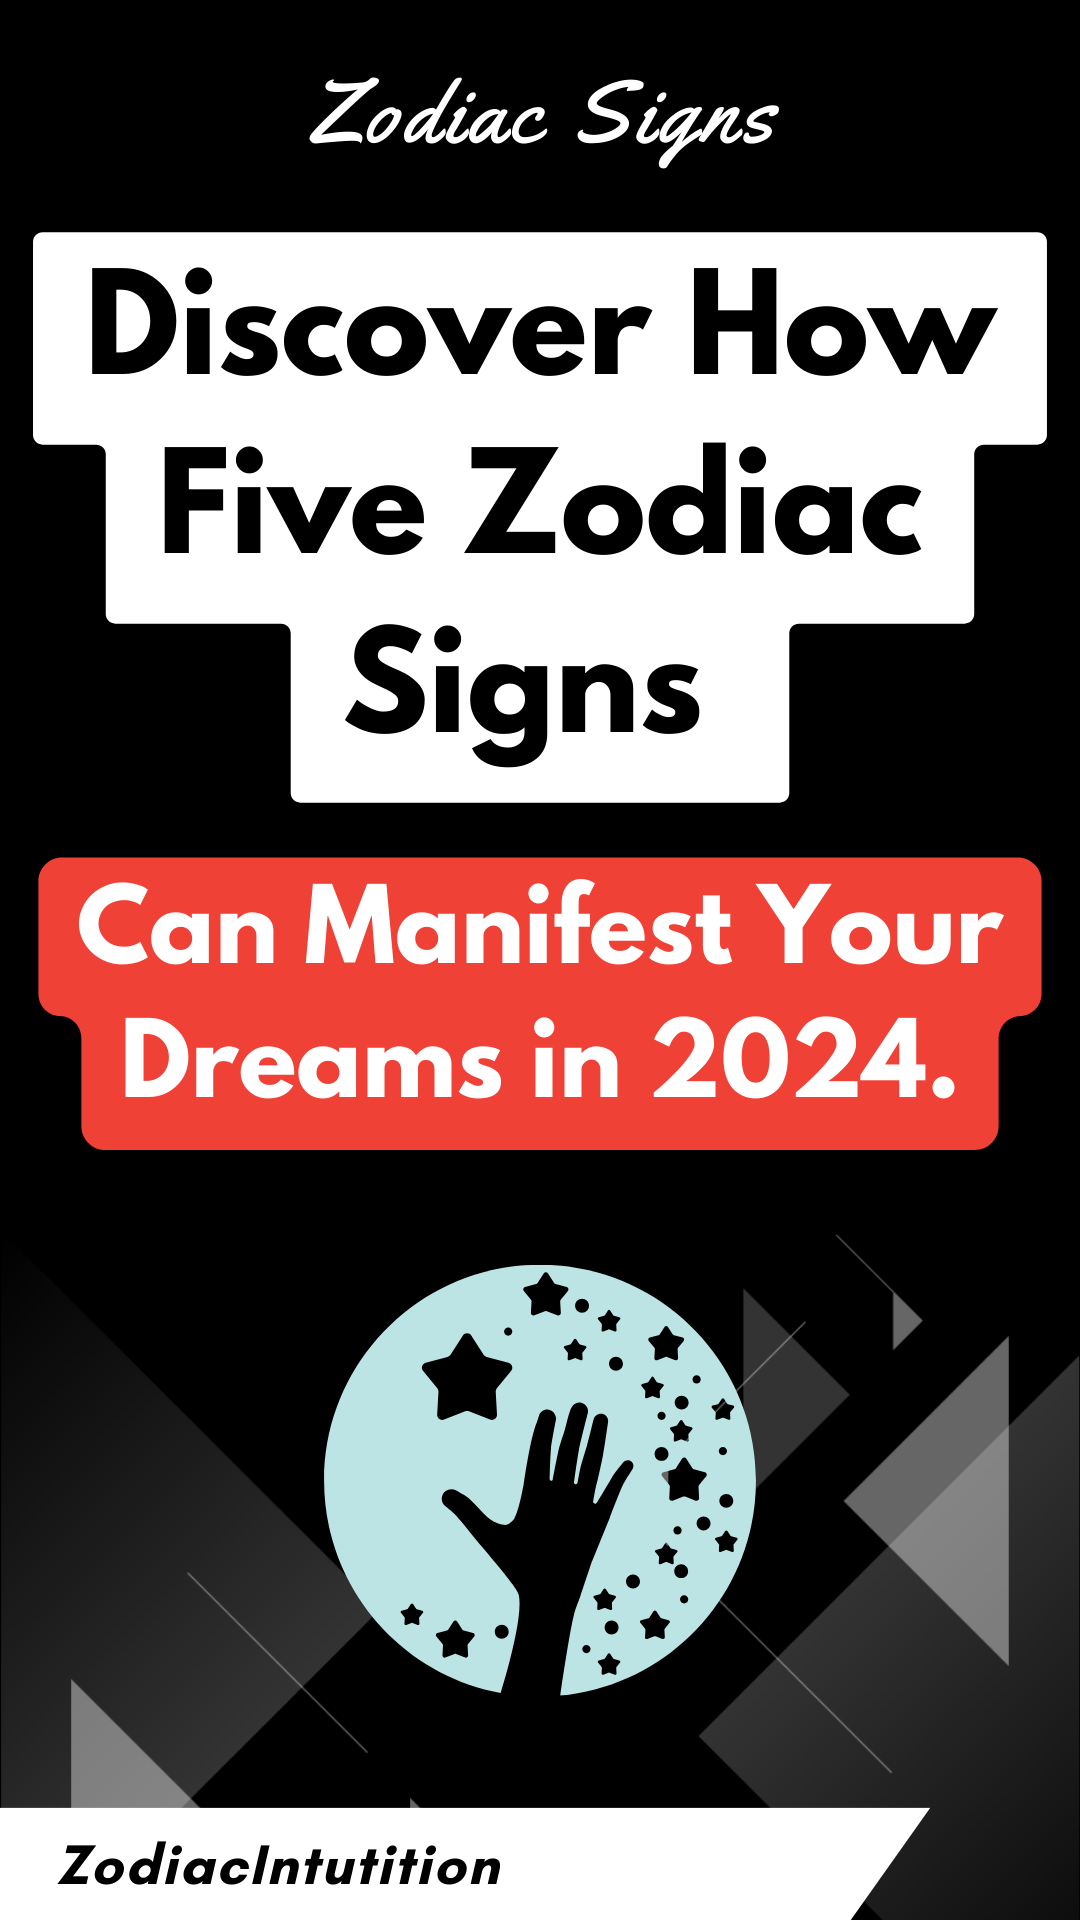 Discover How Five Zodiac Signs Can Manifest Your Dreams in 2024.